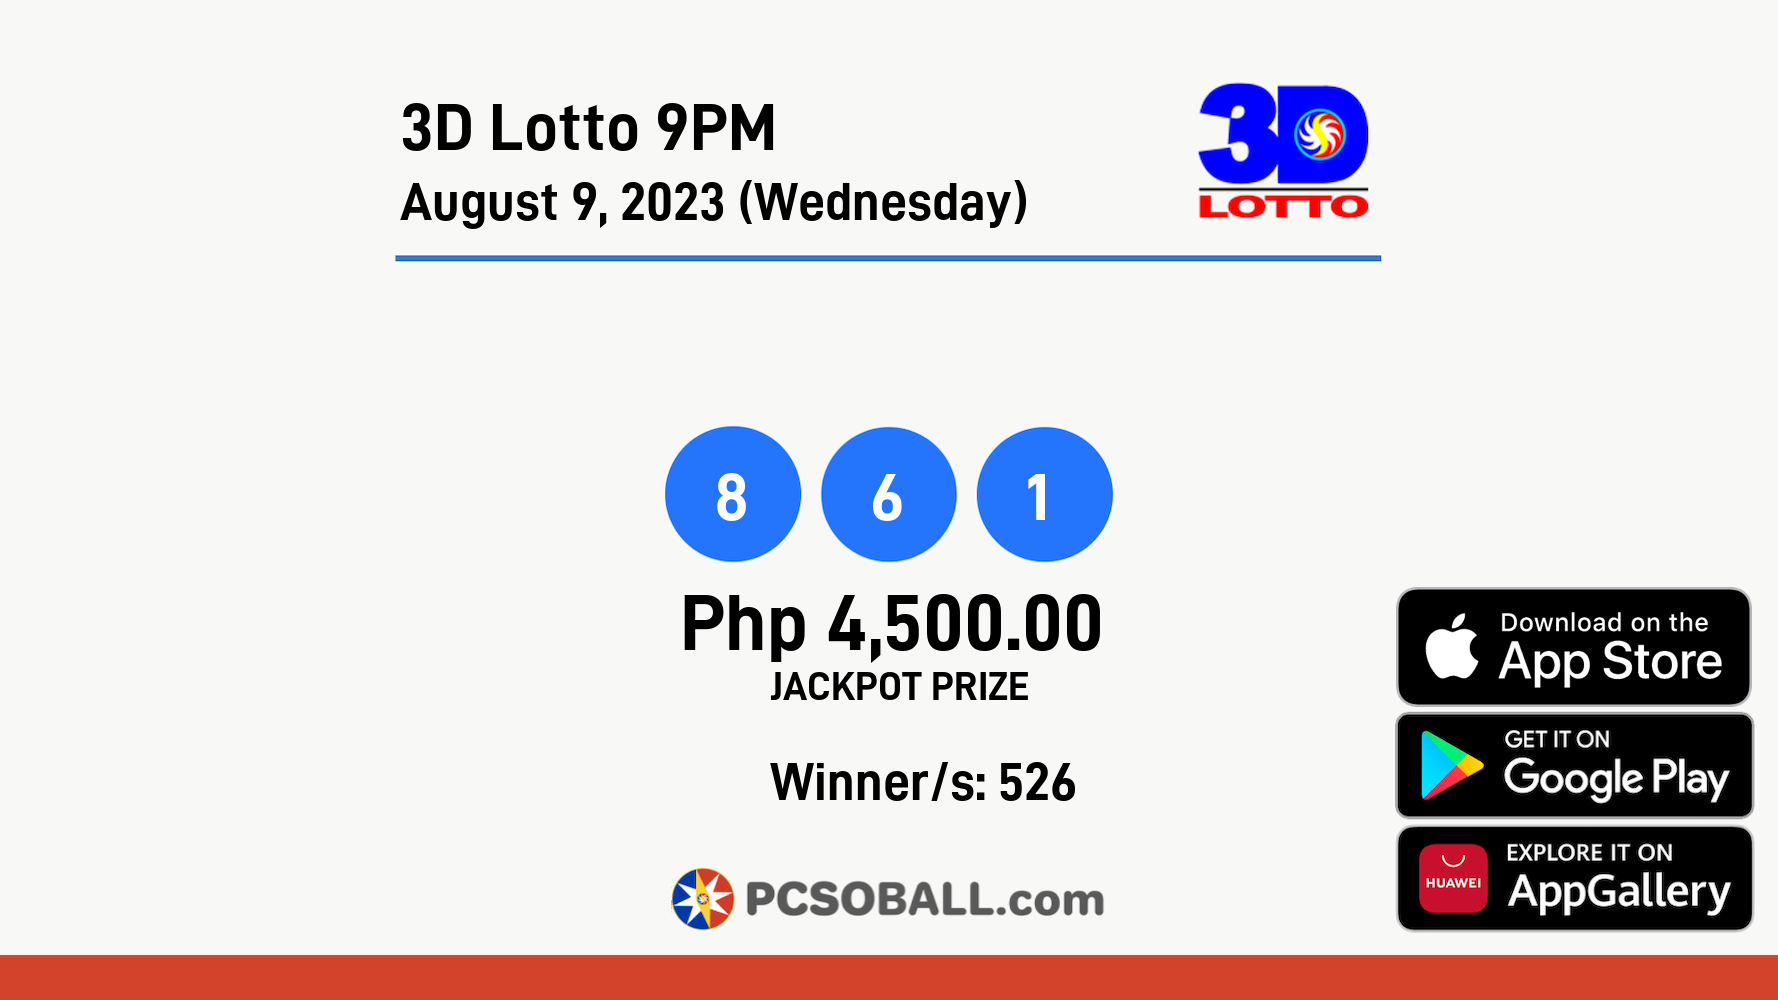 3D Lotto 9PM August 9, 2023 (Wednesday) Result